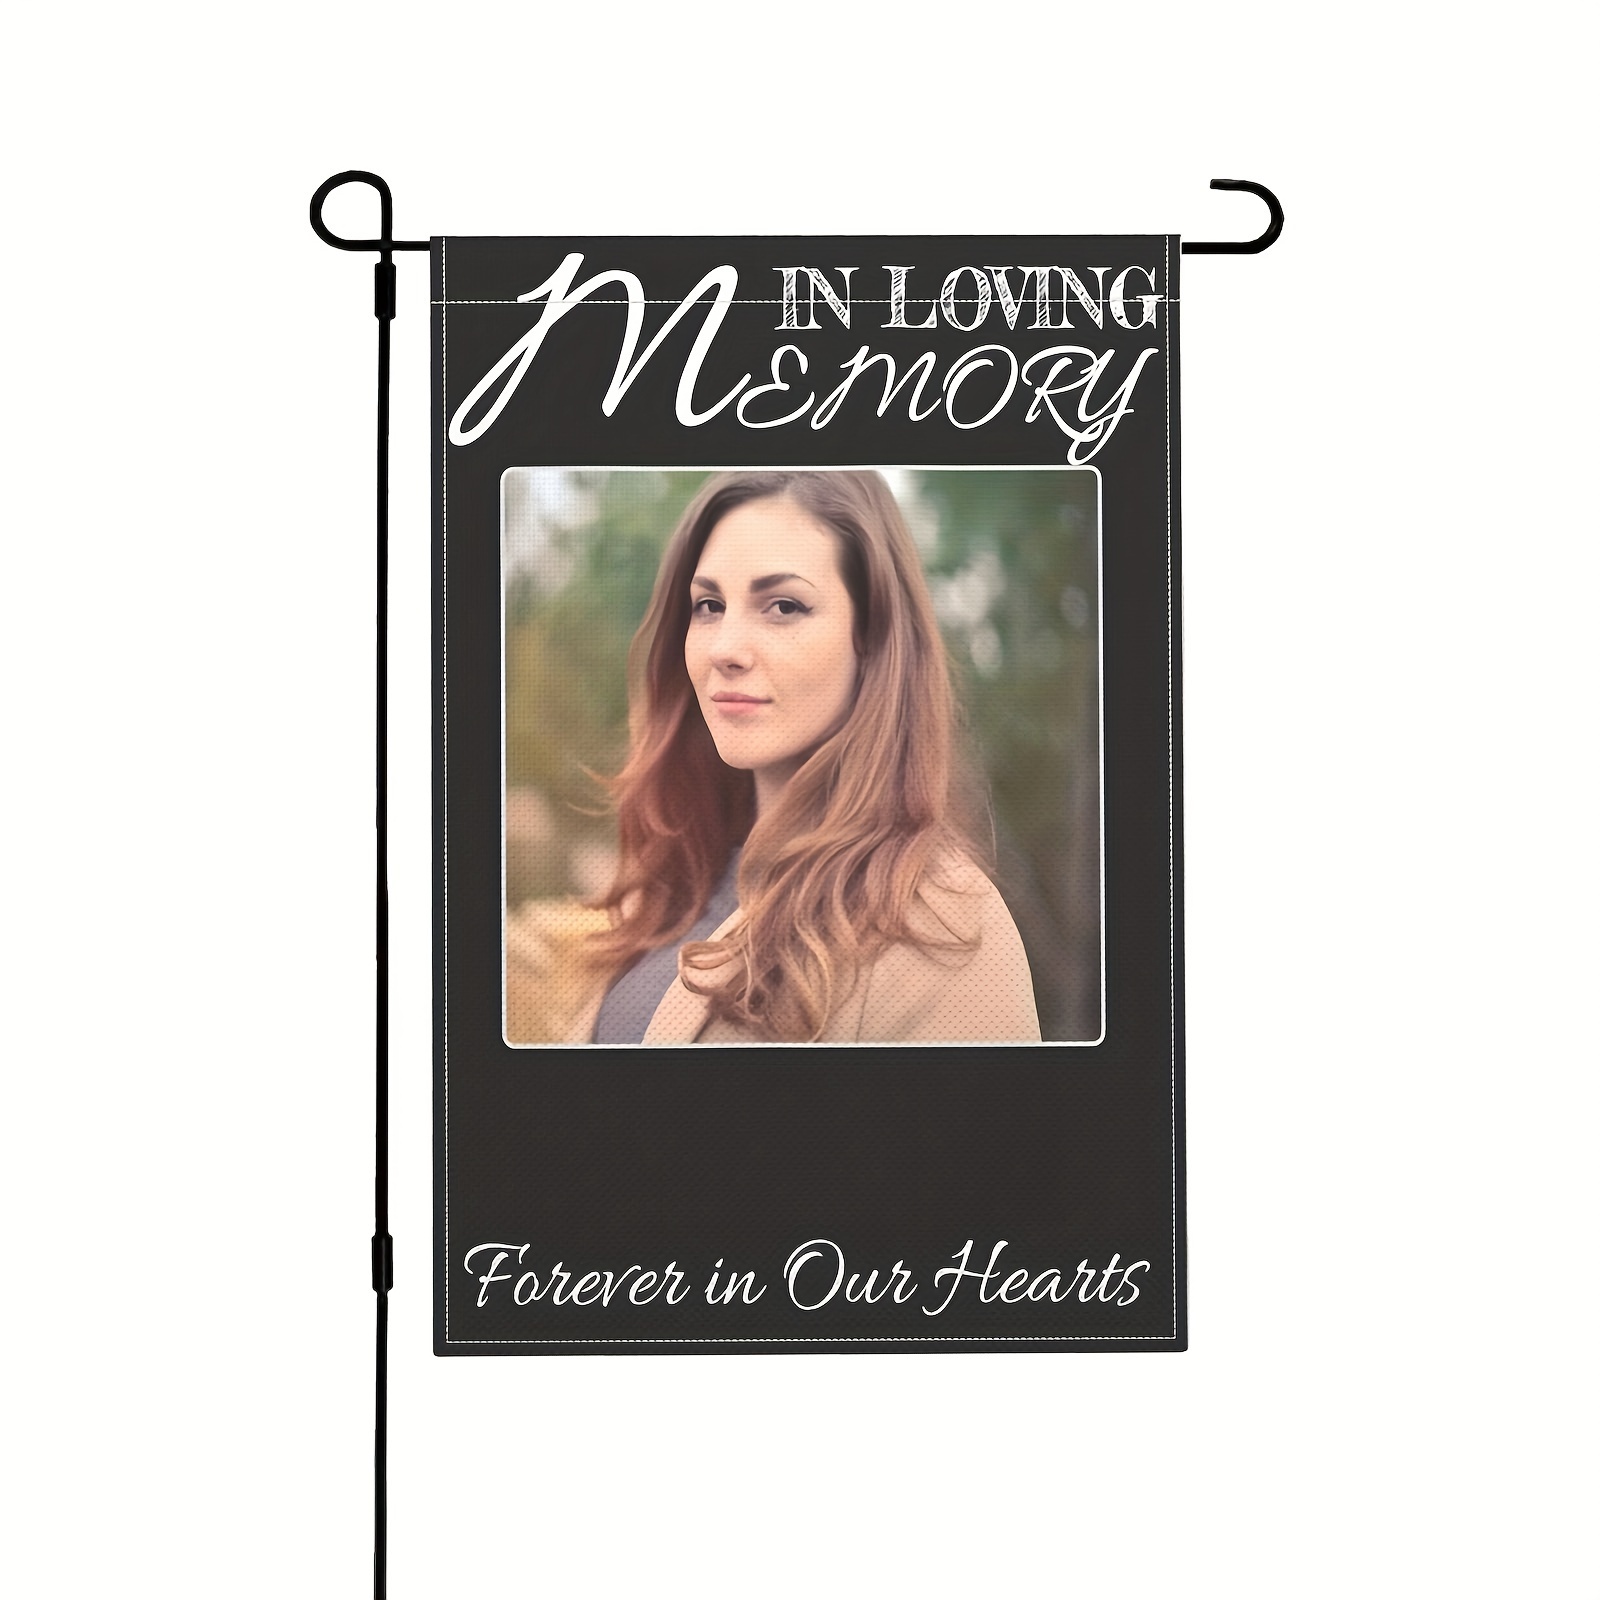 

[custom] Personalized Memorial Flag With Photo Memorial Garden Flags For Cemetery In Loving Memory Garden Flag Memorial Gifts For Loss Of Loved 1 Lawn Yard Flag, 12x18 Inch Double Sided(no Flagpole)